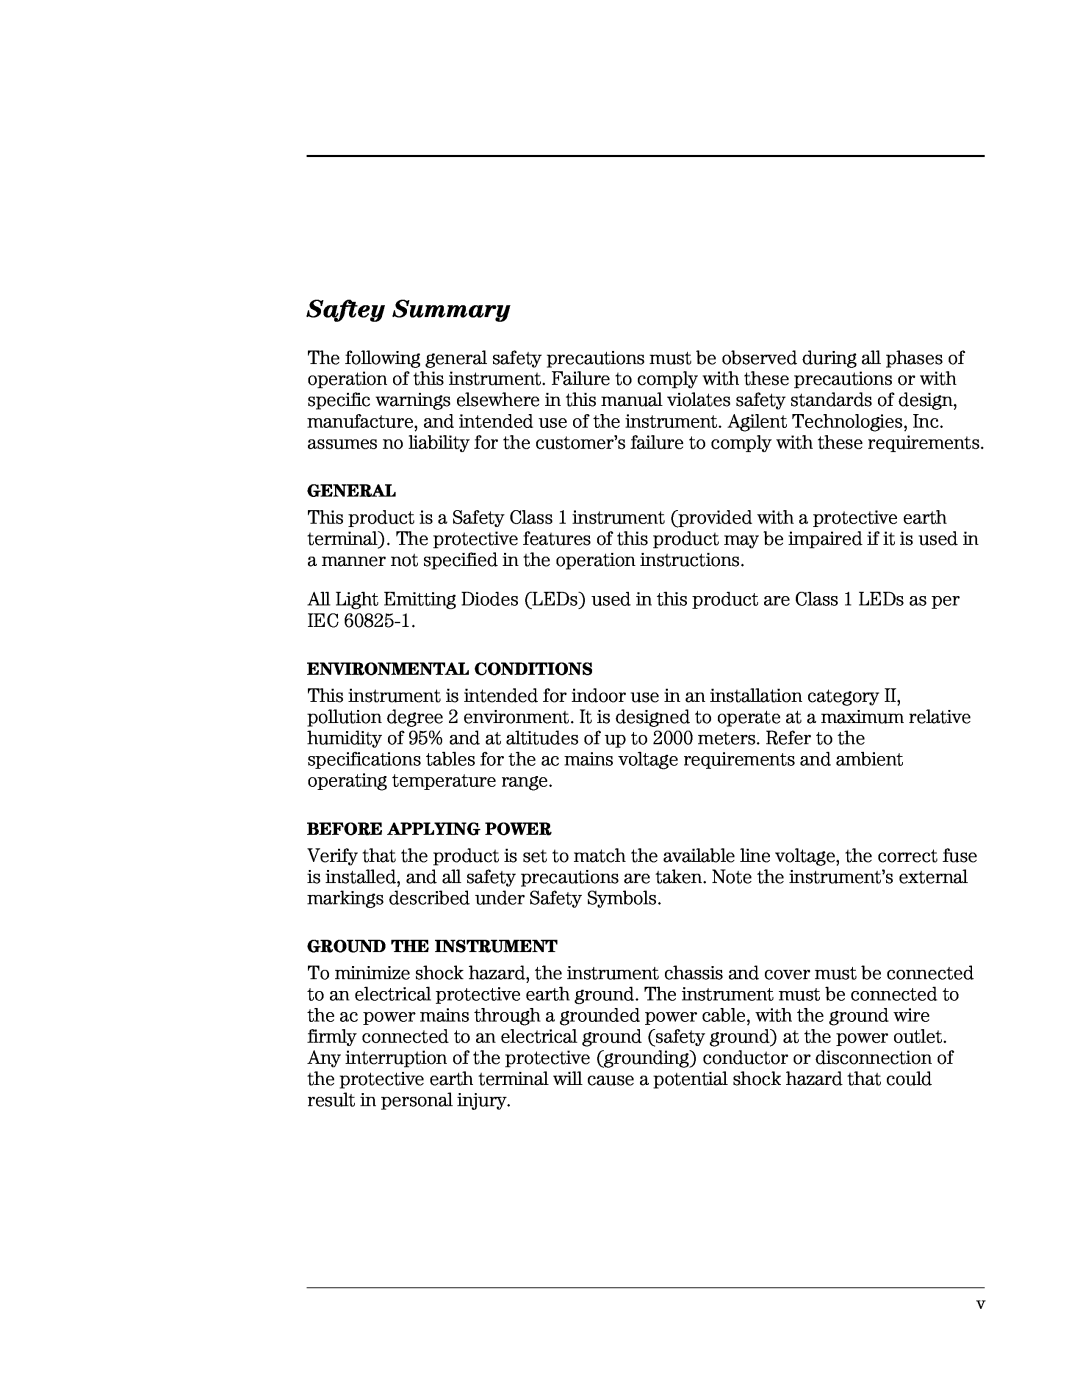 Agilent Technologies 89441A manual Saftey Summary, General, Environmental Conditions, Before Applying Power 